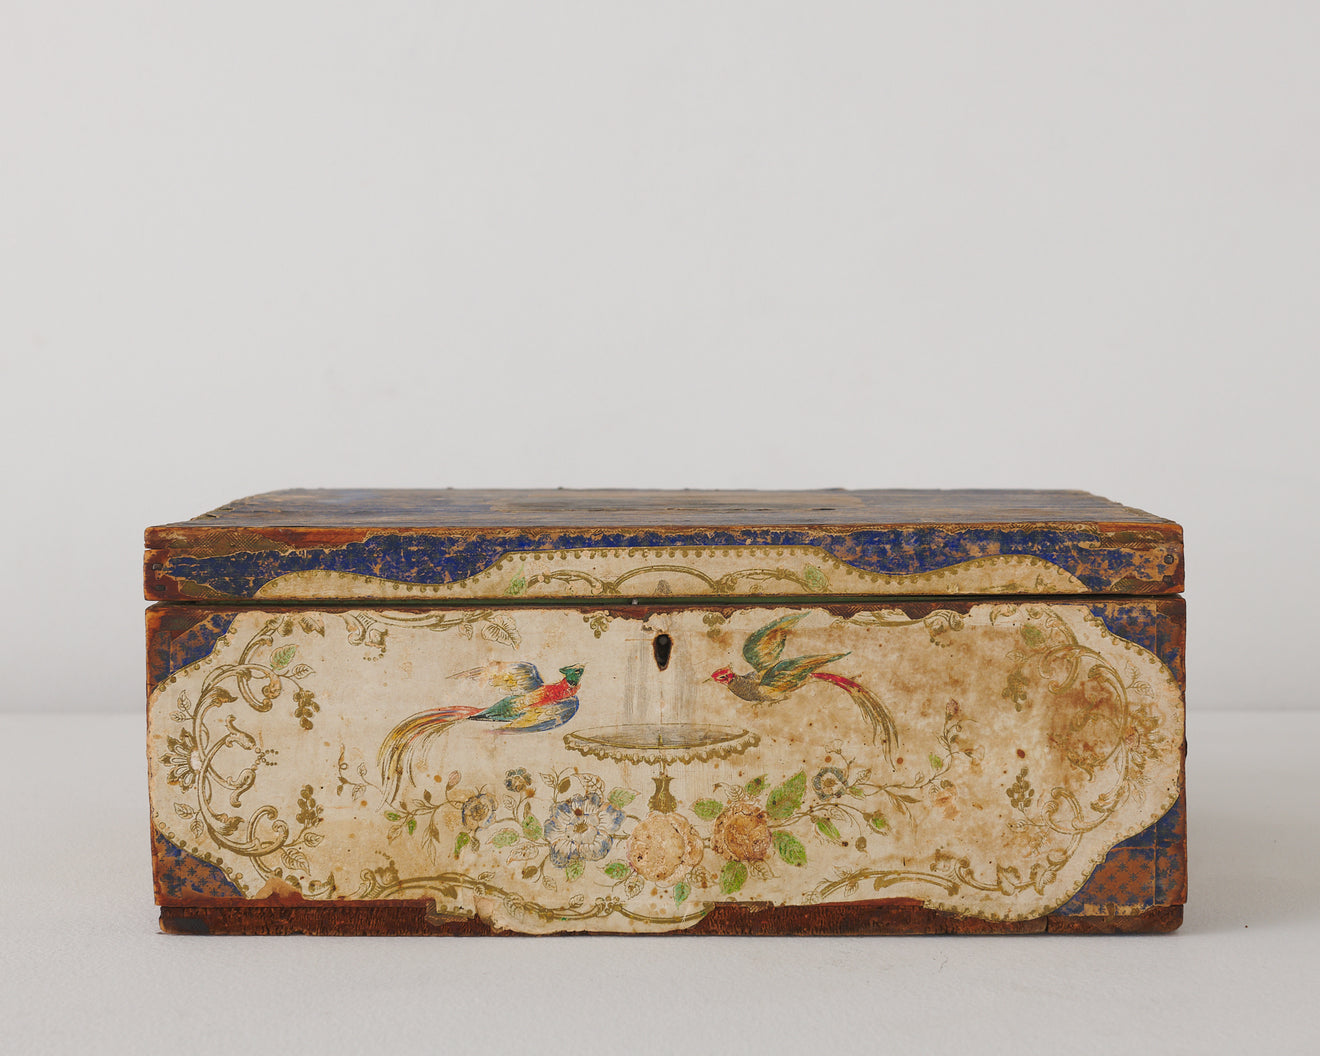 ANTIQUE AMERICAN DECOUPAGE SEWING BOX